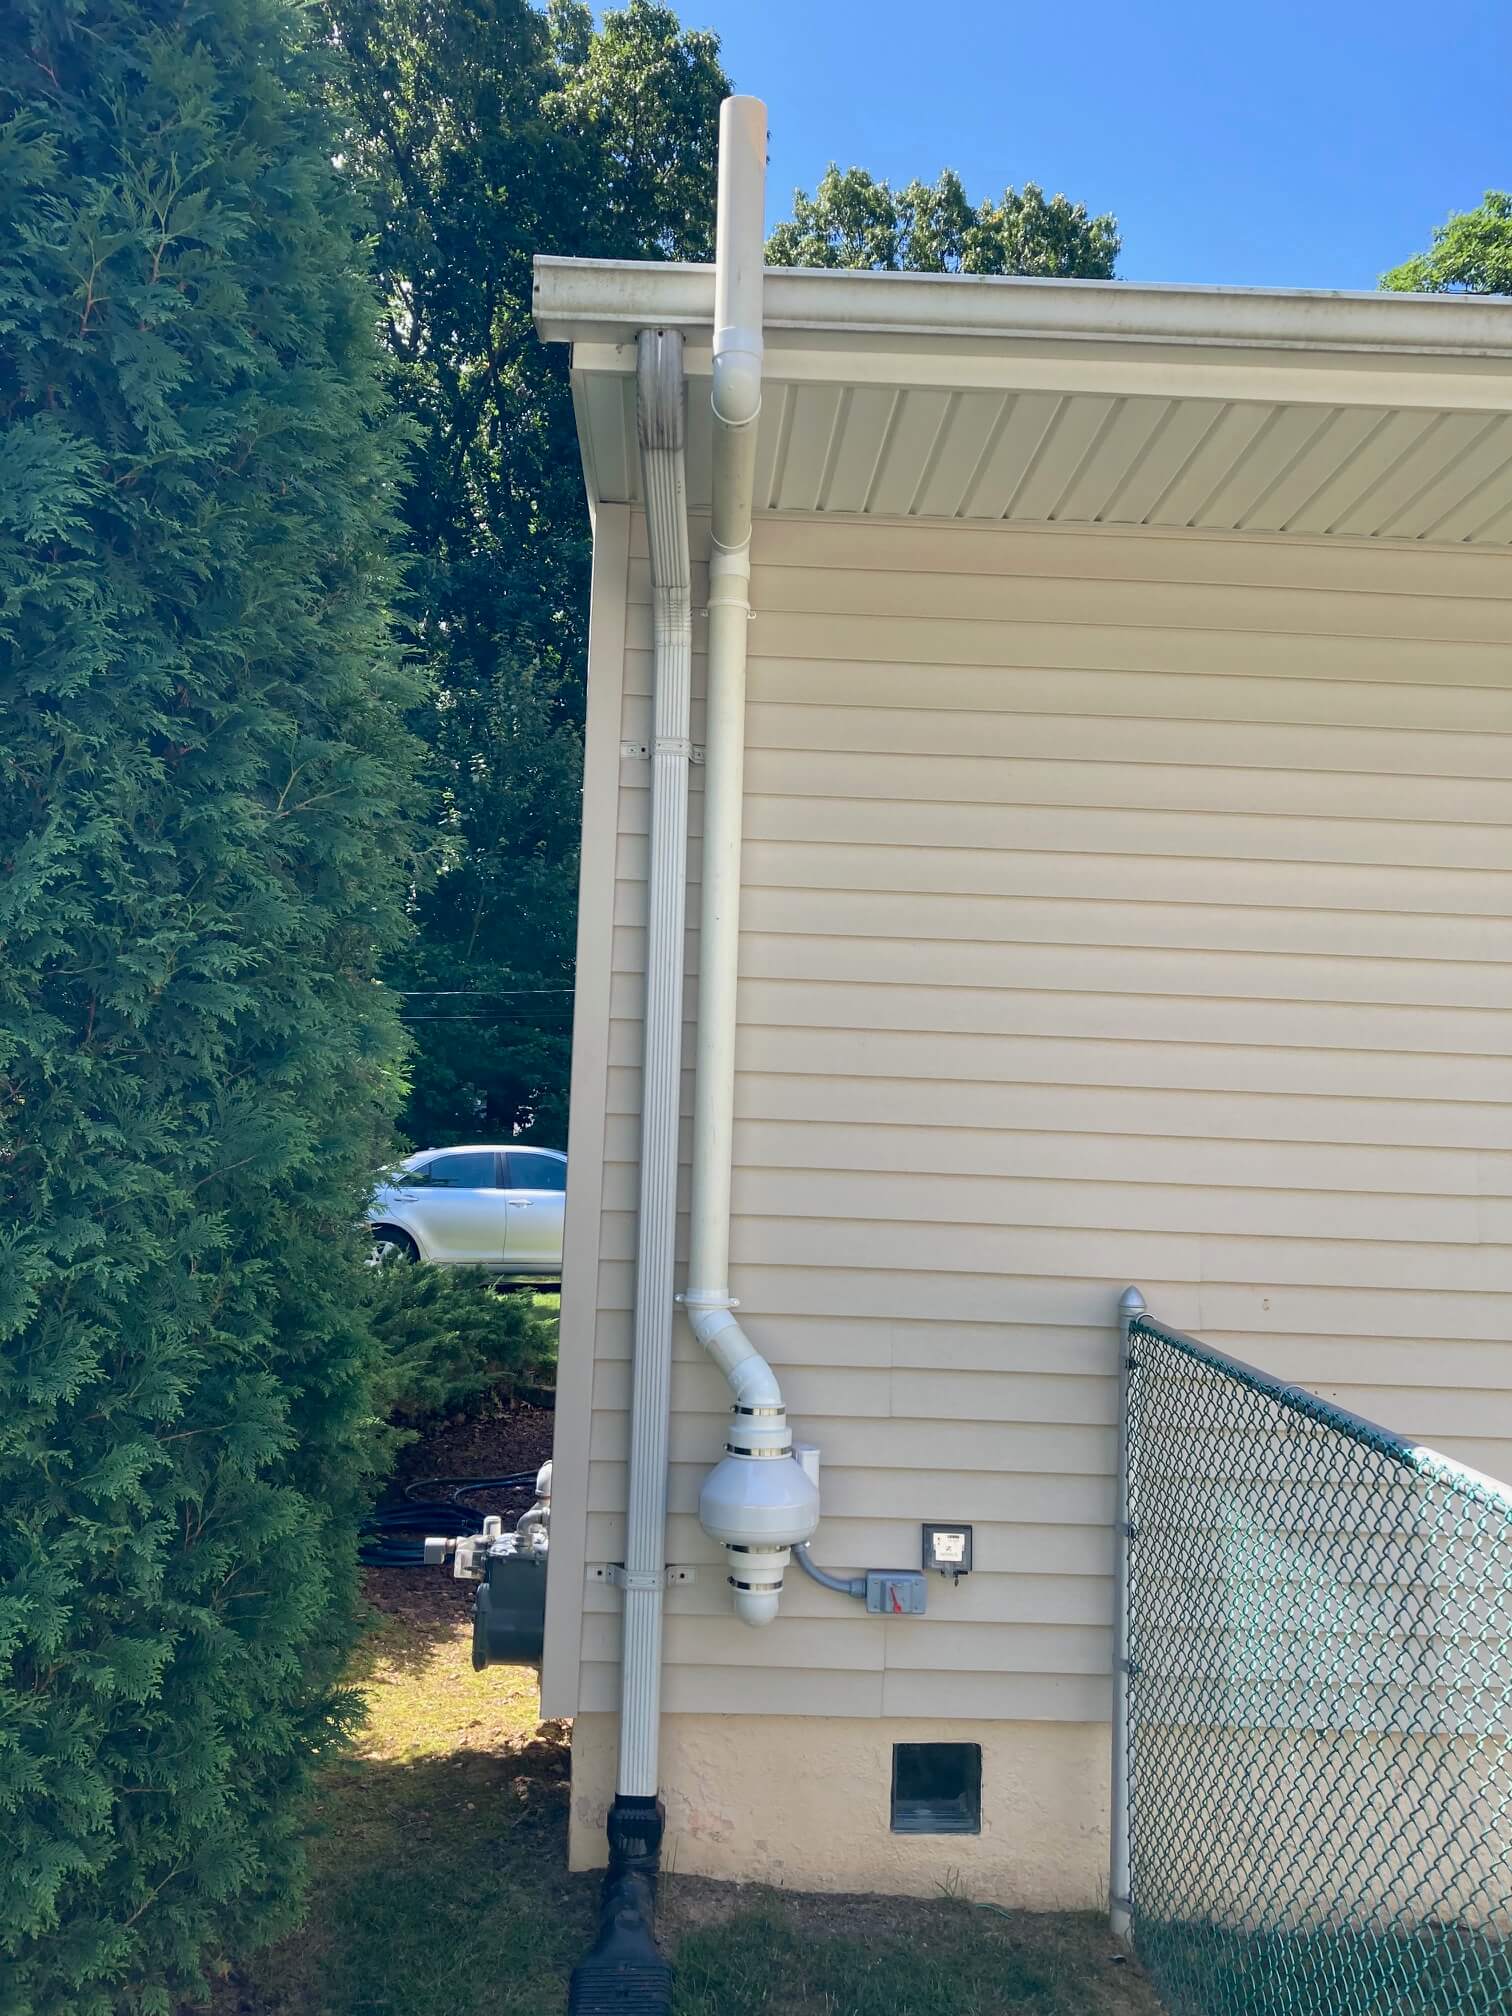 Exterior shot of a radon mitigation system with exhaust pipe